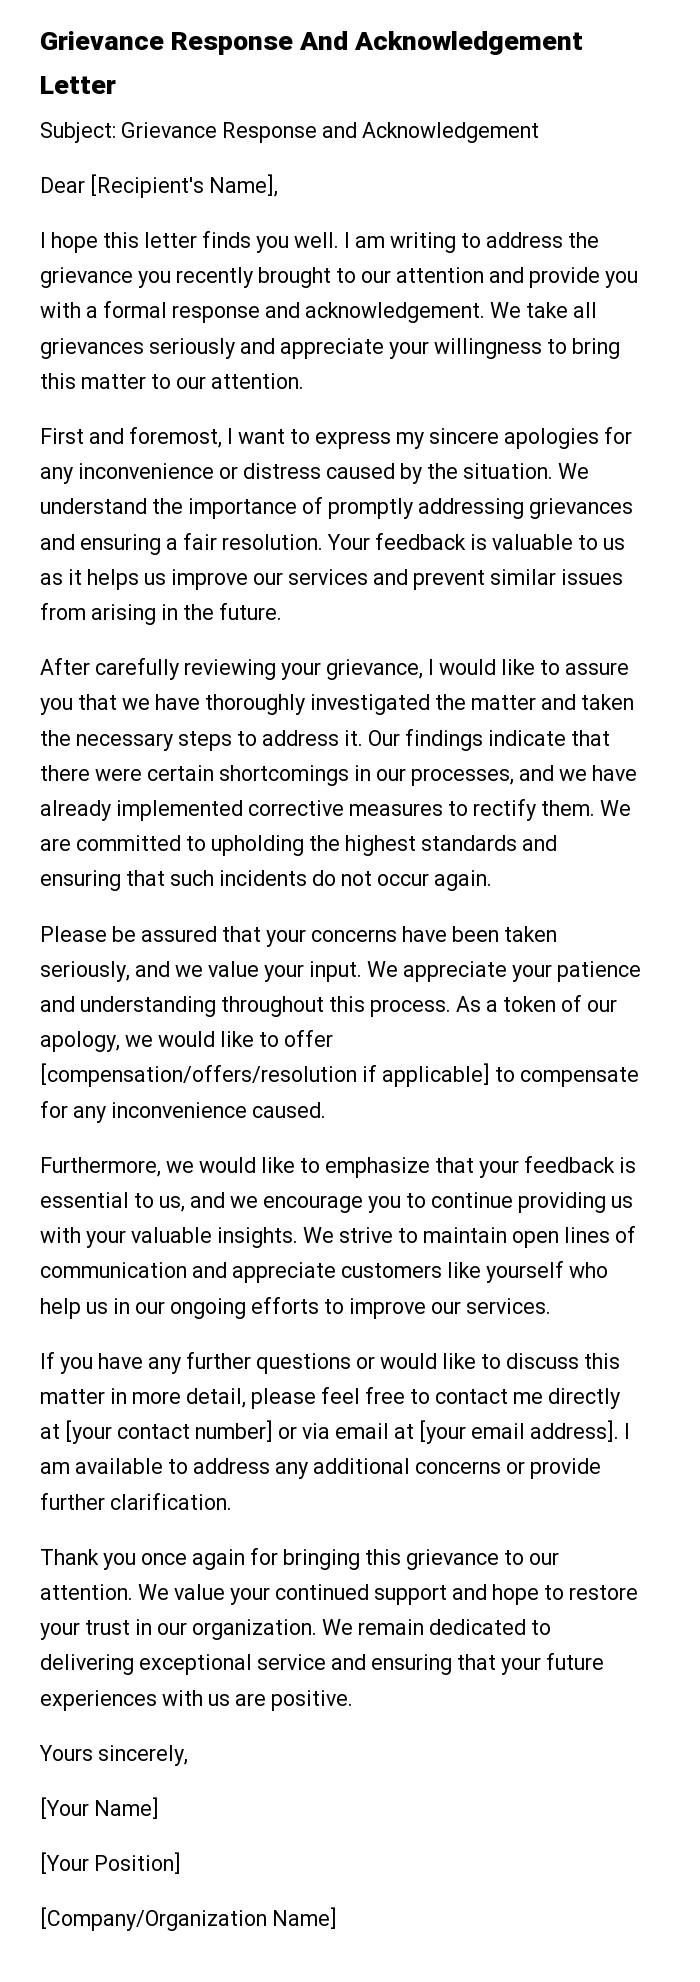 Grievance Response And Acknowledgement Letter